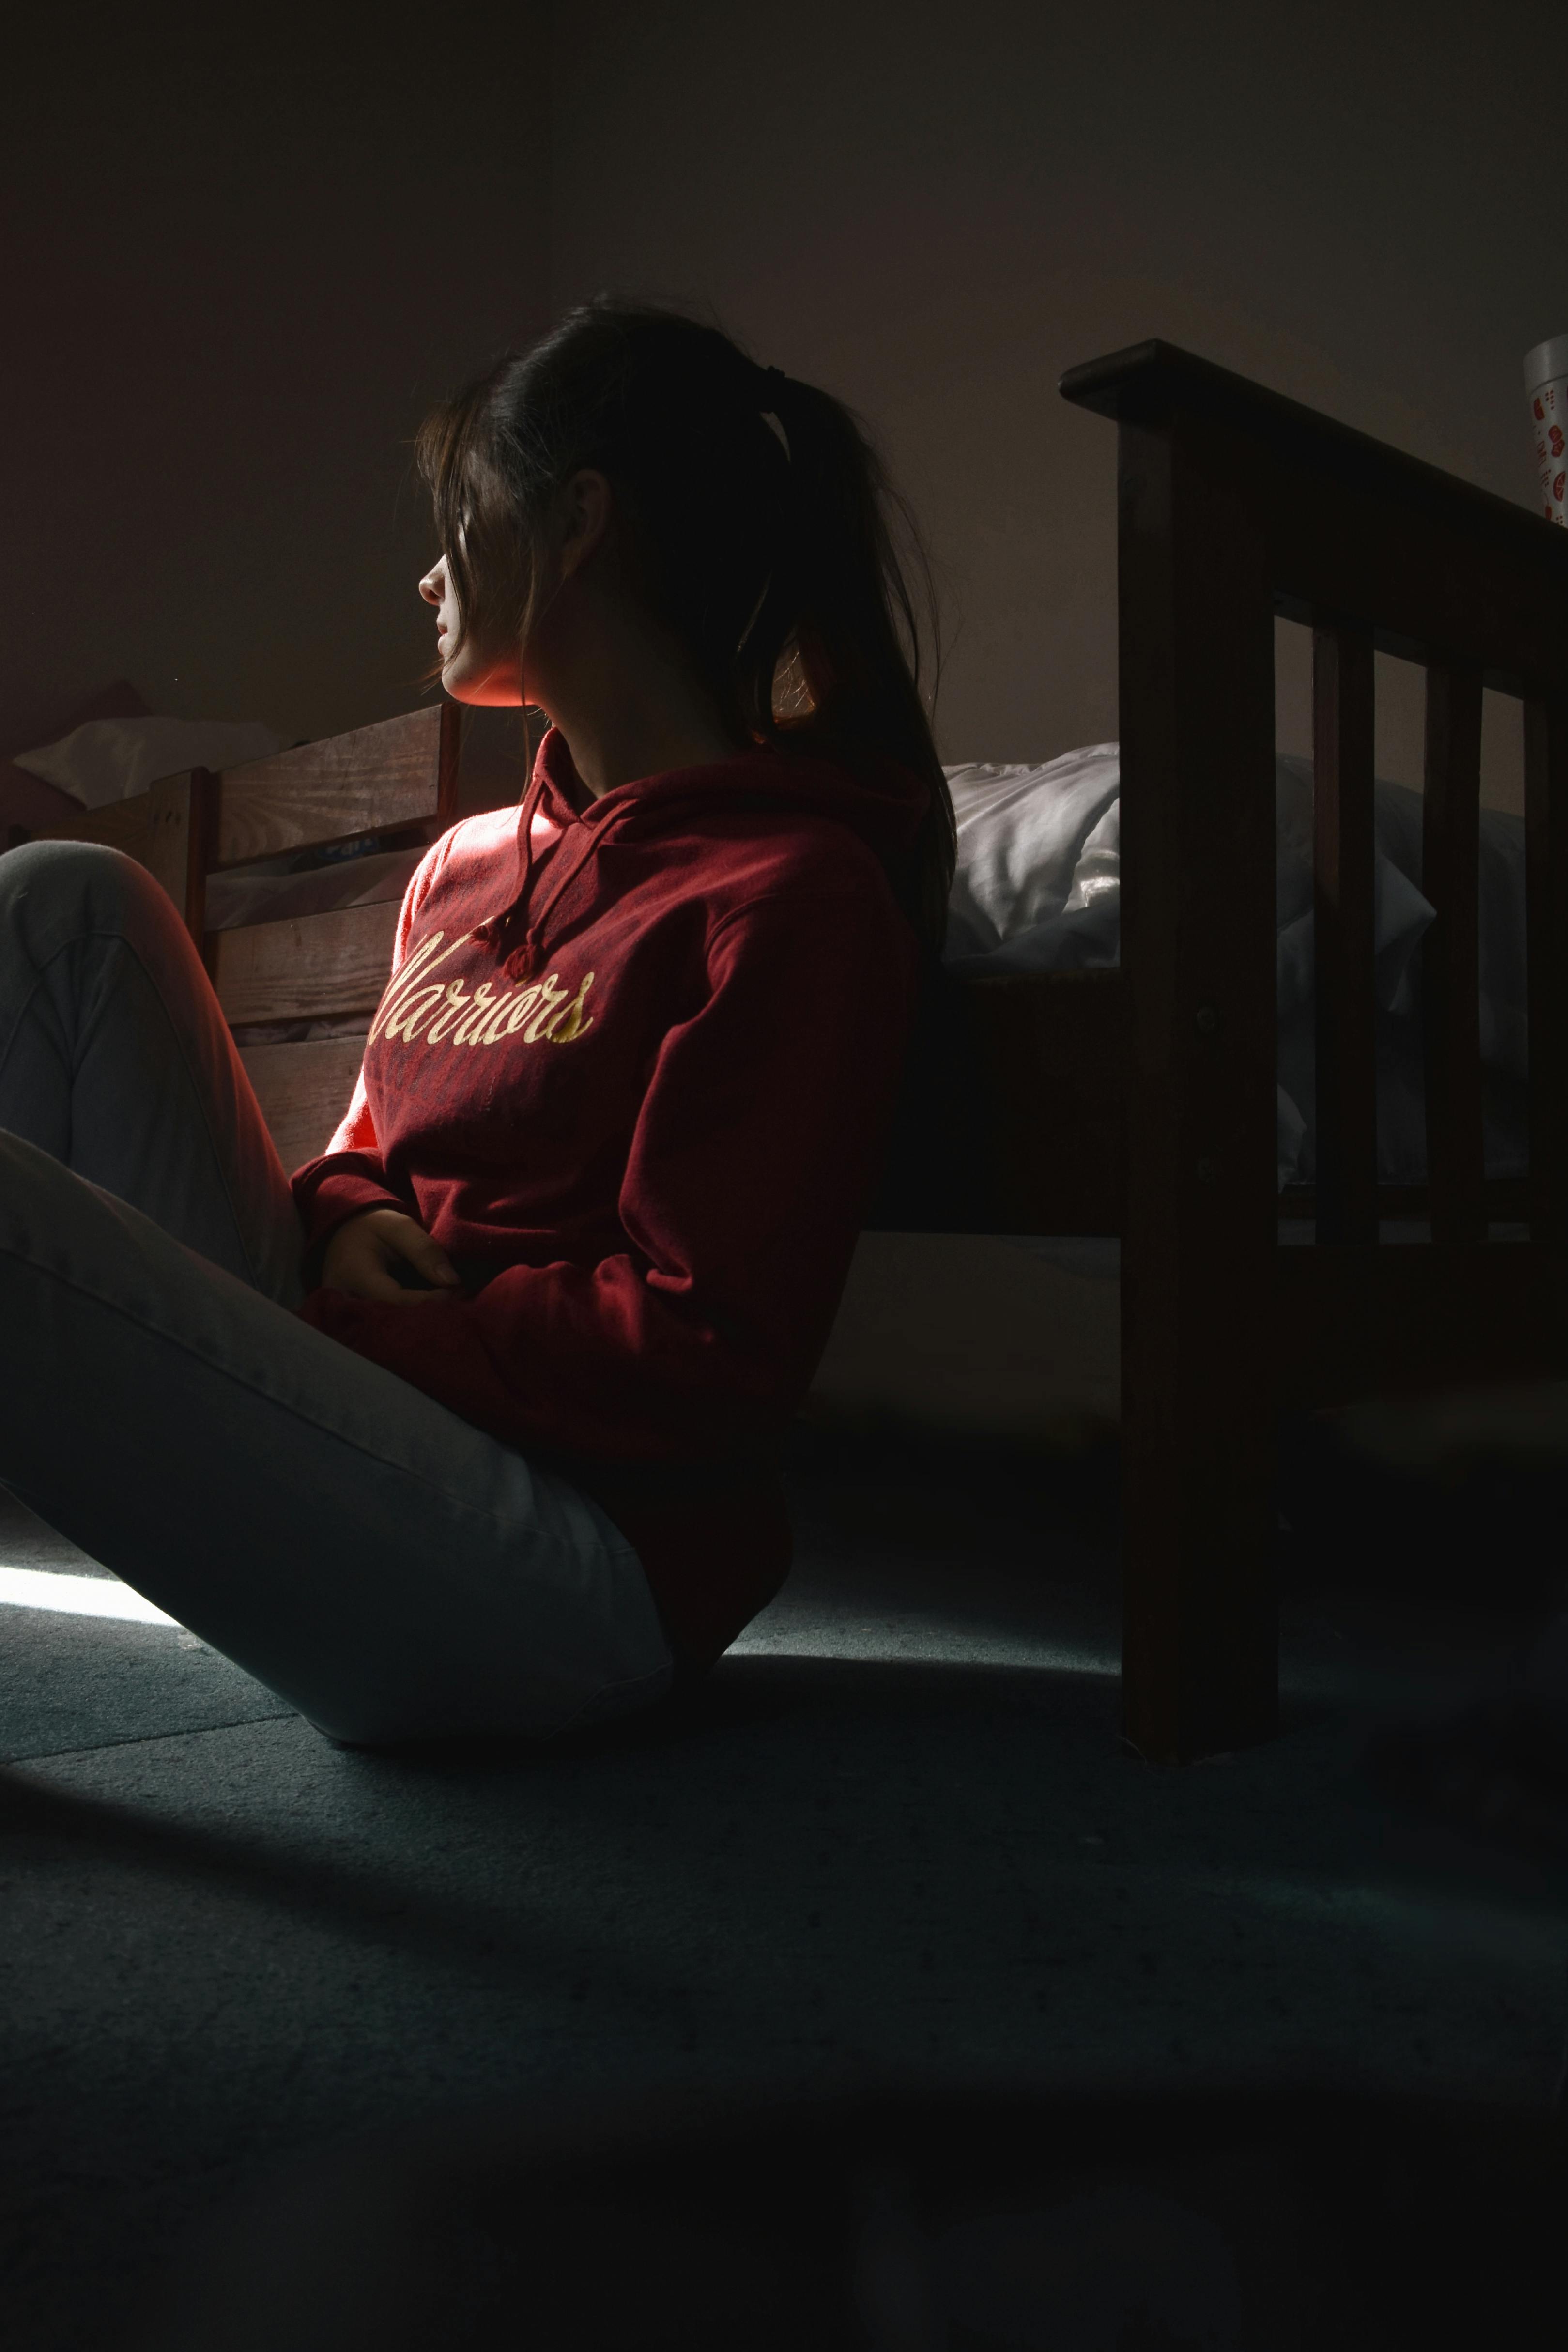 A partial silhouette of a sad woman sitting on the floor next to her bed | Source: Pexels